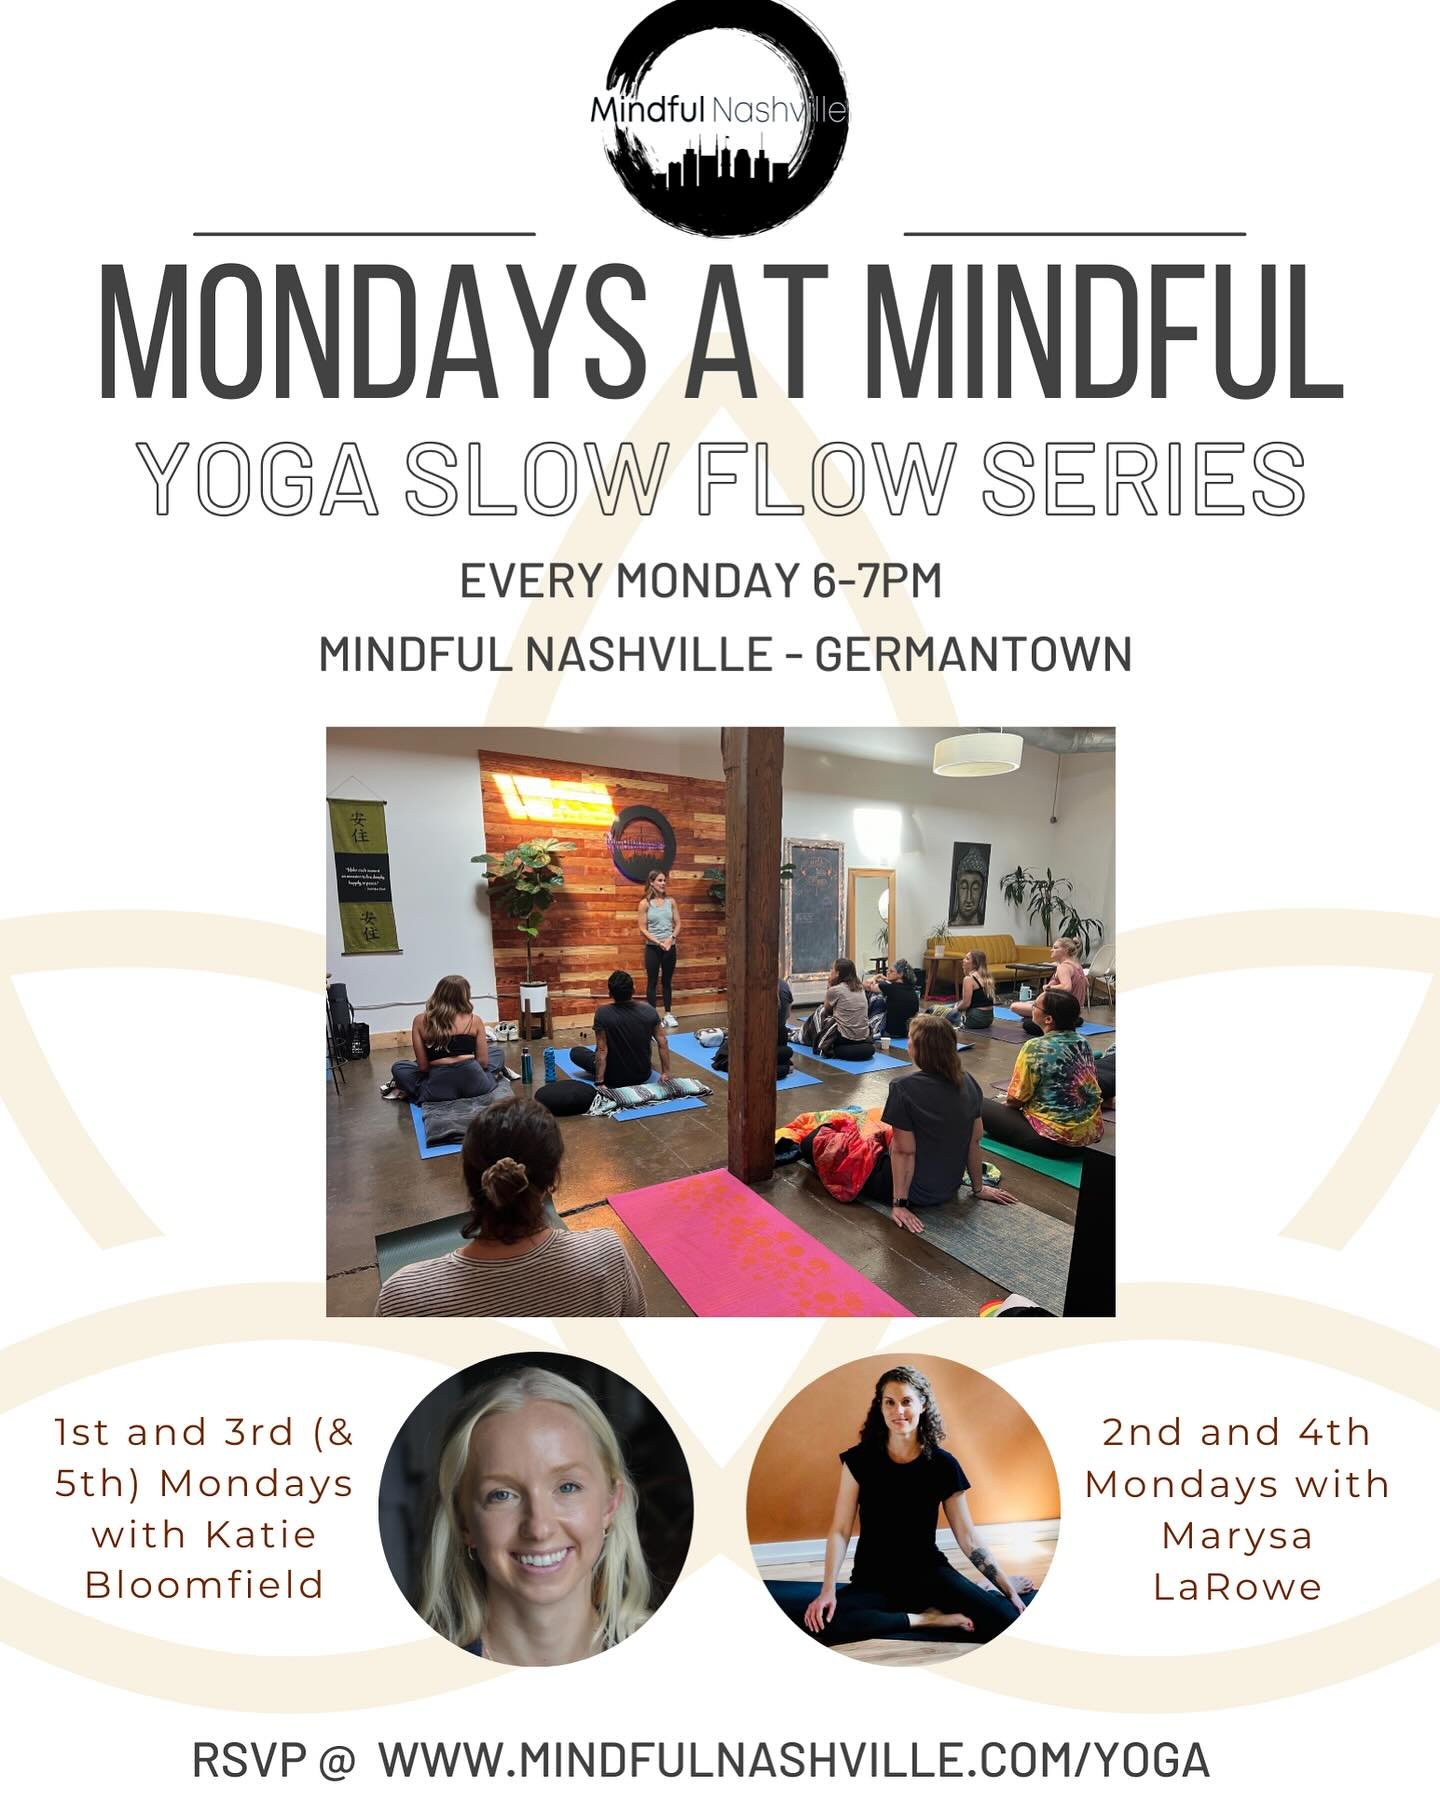 Join us for second of the new weekly Mondays at Mindful, slow flow yoga class! Each week is self contained so you can come any Monday! RSVP at www.mindfulnashville.com/yoga #nashvilleyoga #nashvillevinyasa